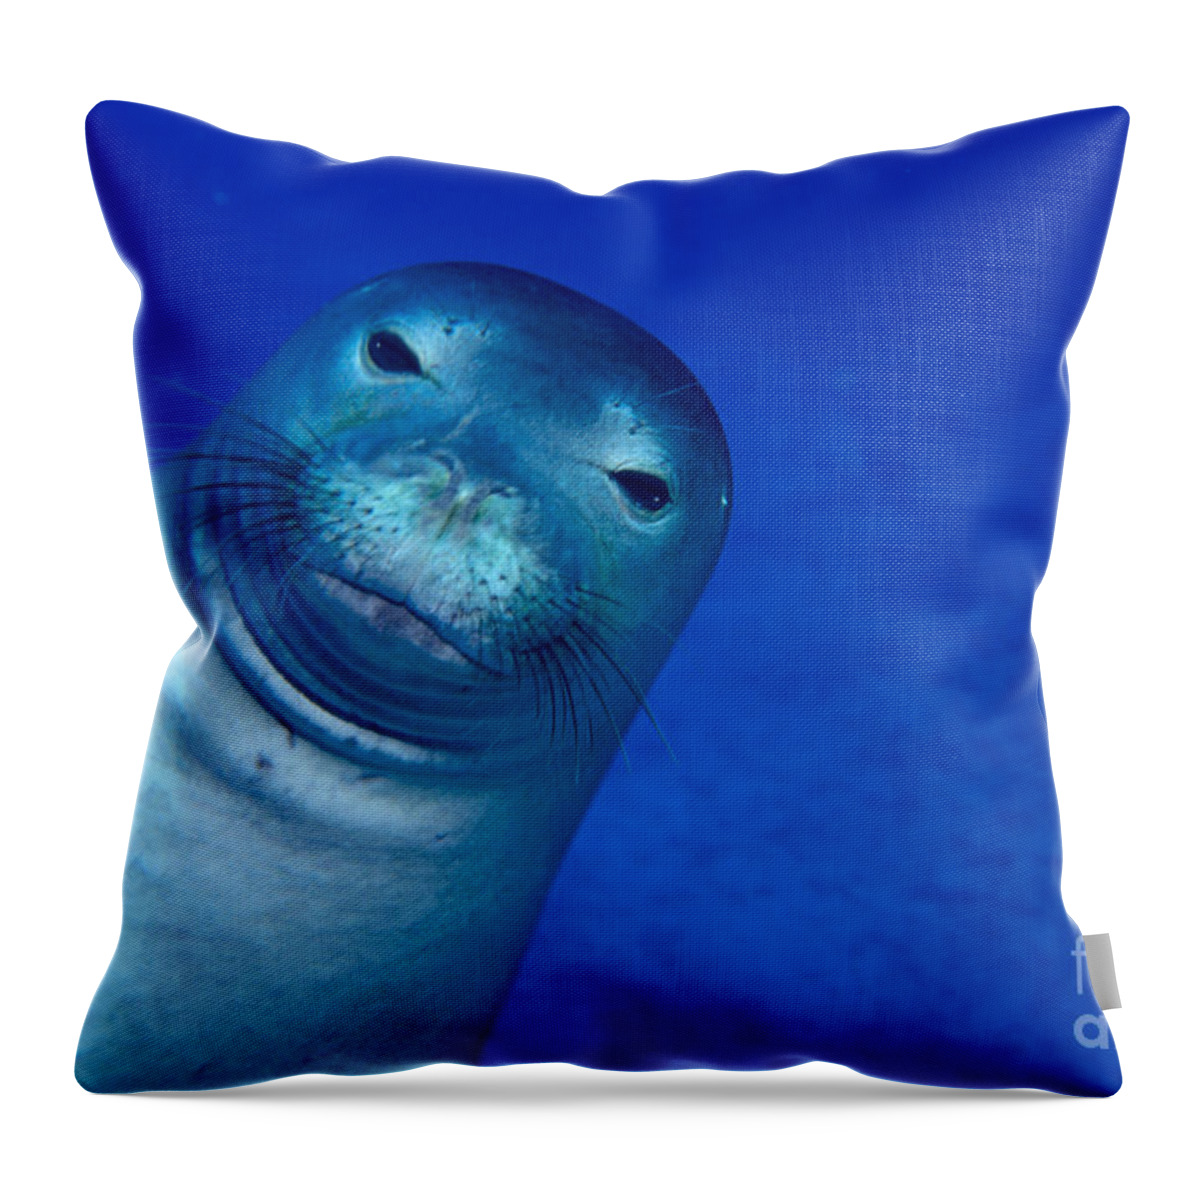 Animal Art Throw Pillow featuring the photograph Hawaiian Monk Seal by Ed Robinson - Printscapes